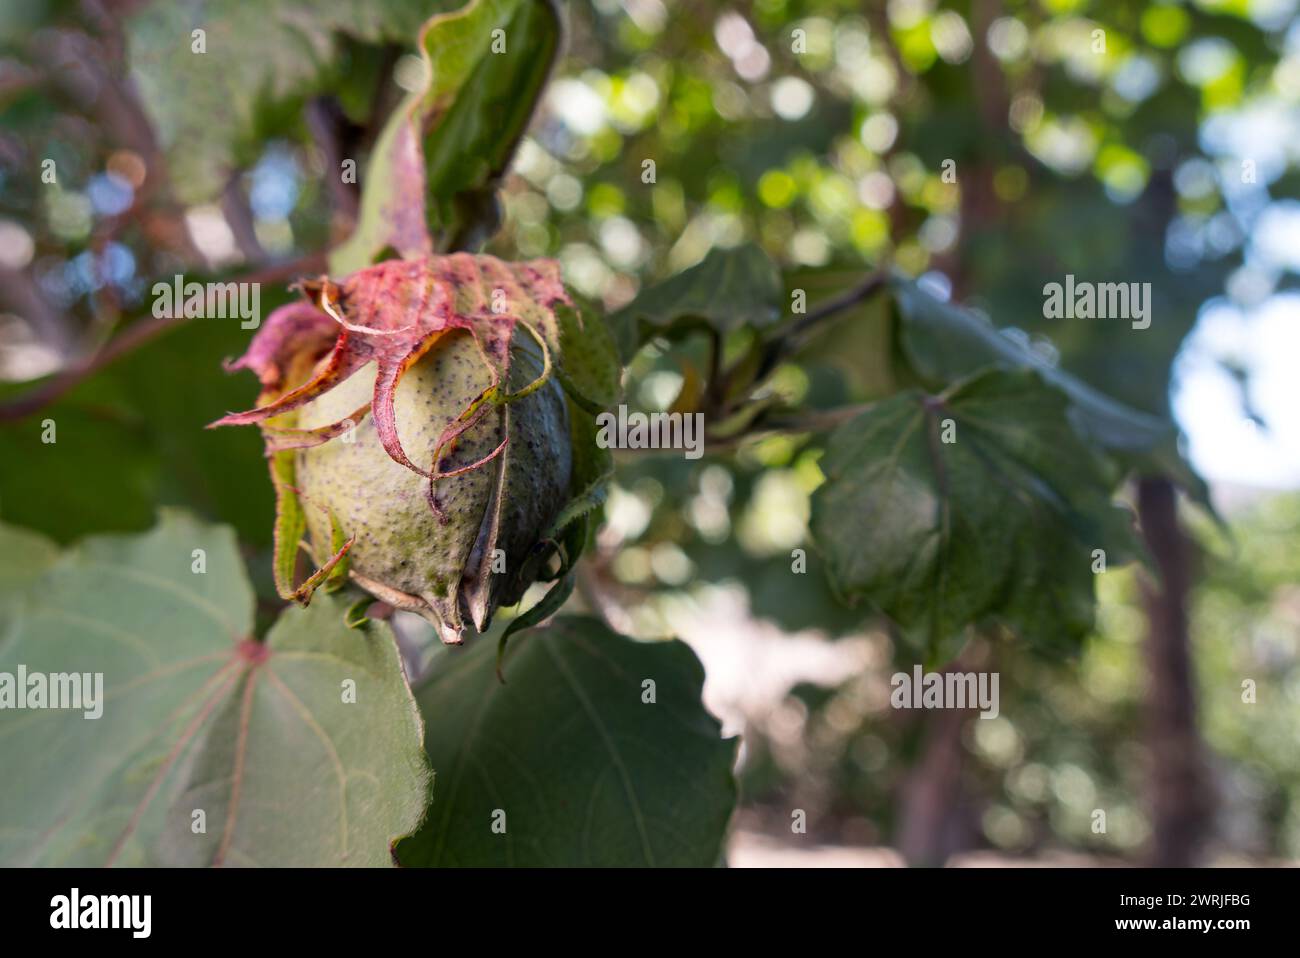 A Gossypium arboreum, cotton plant, closed bud, with space for text Stock Photo